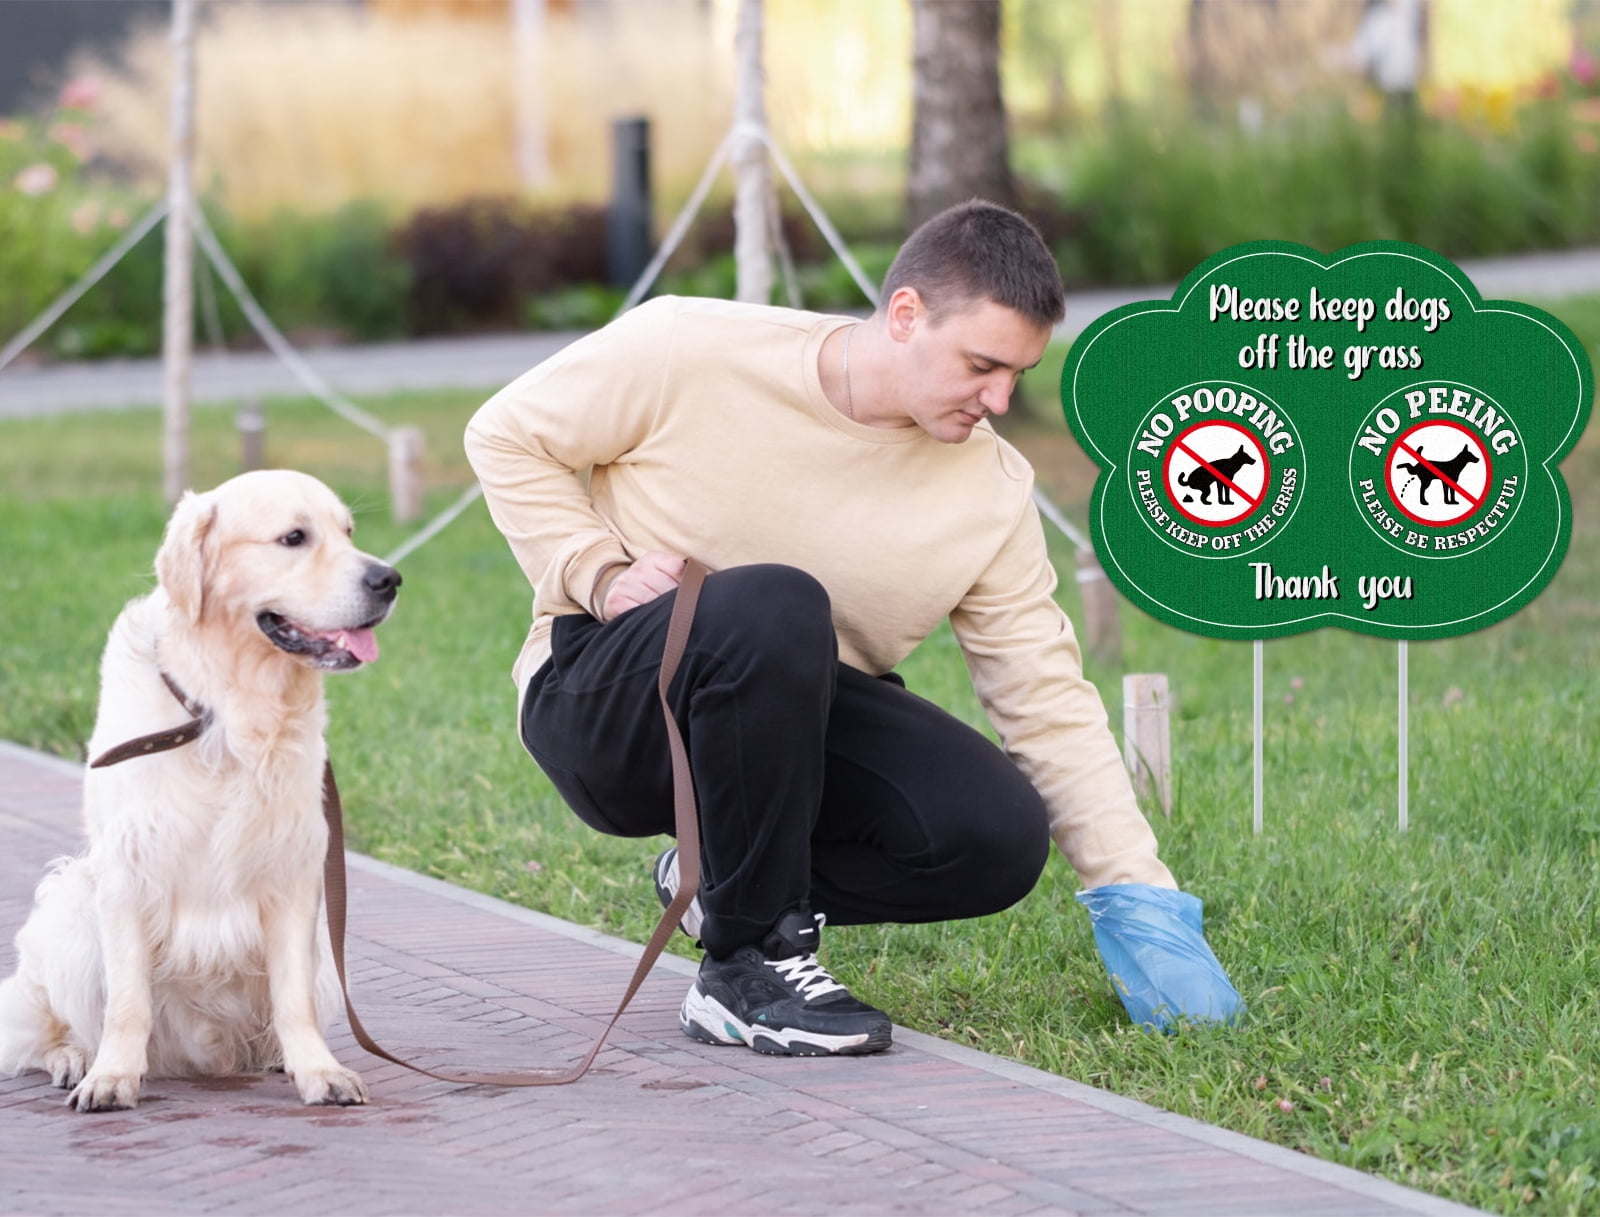 buy-waahome-no-dog-poop-signs-no-peeing-dog-signs-for-yard-keep-dogs